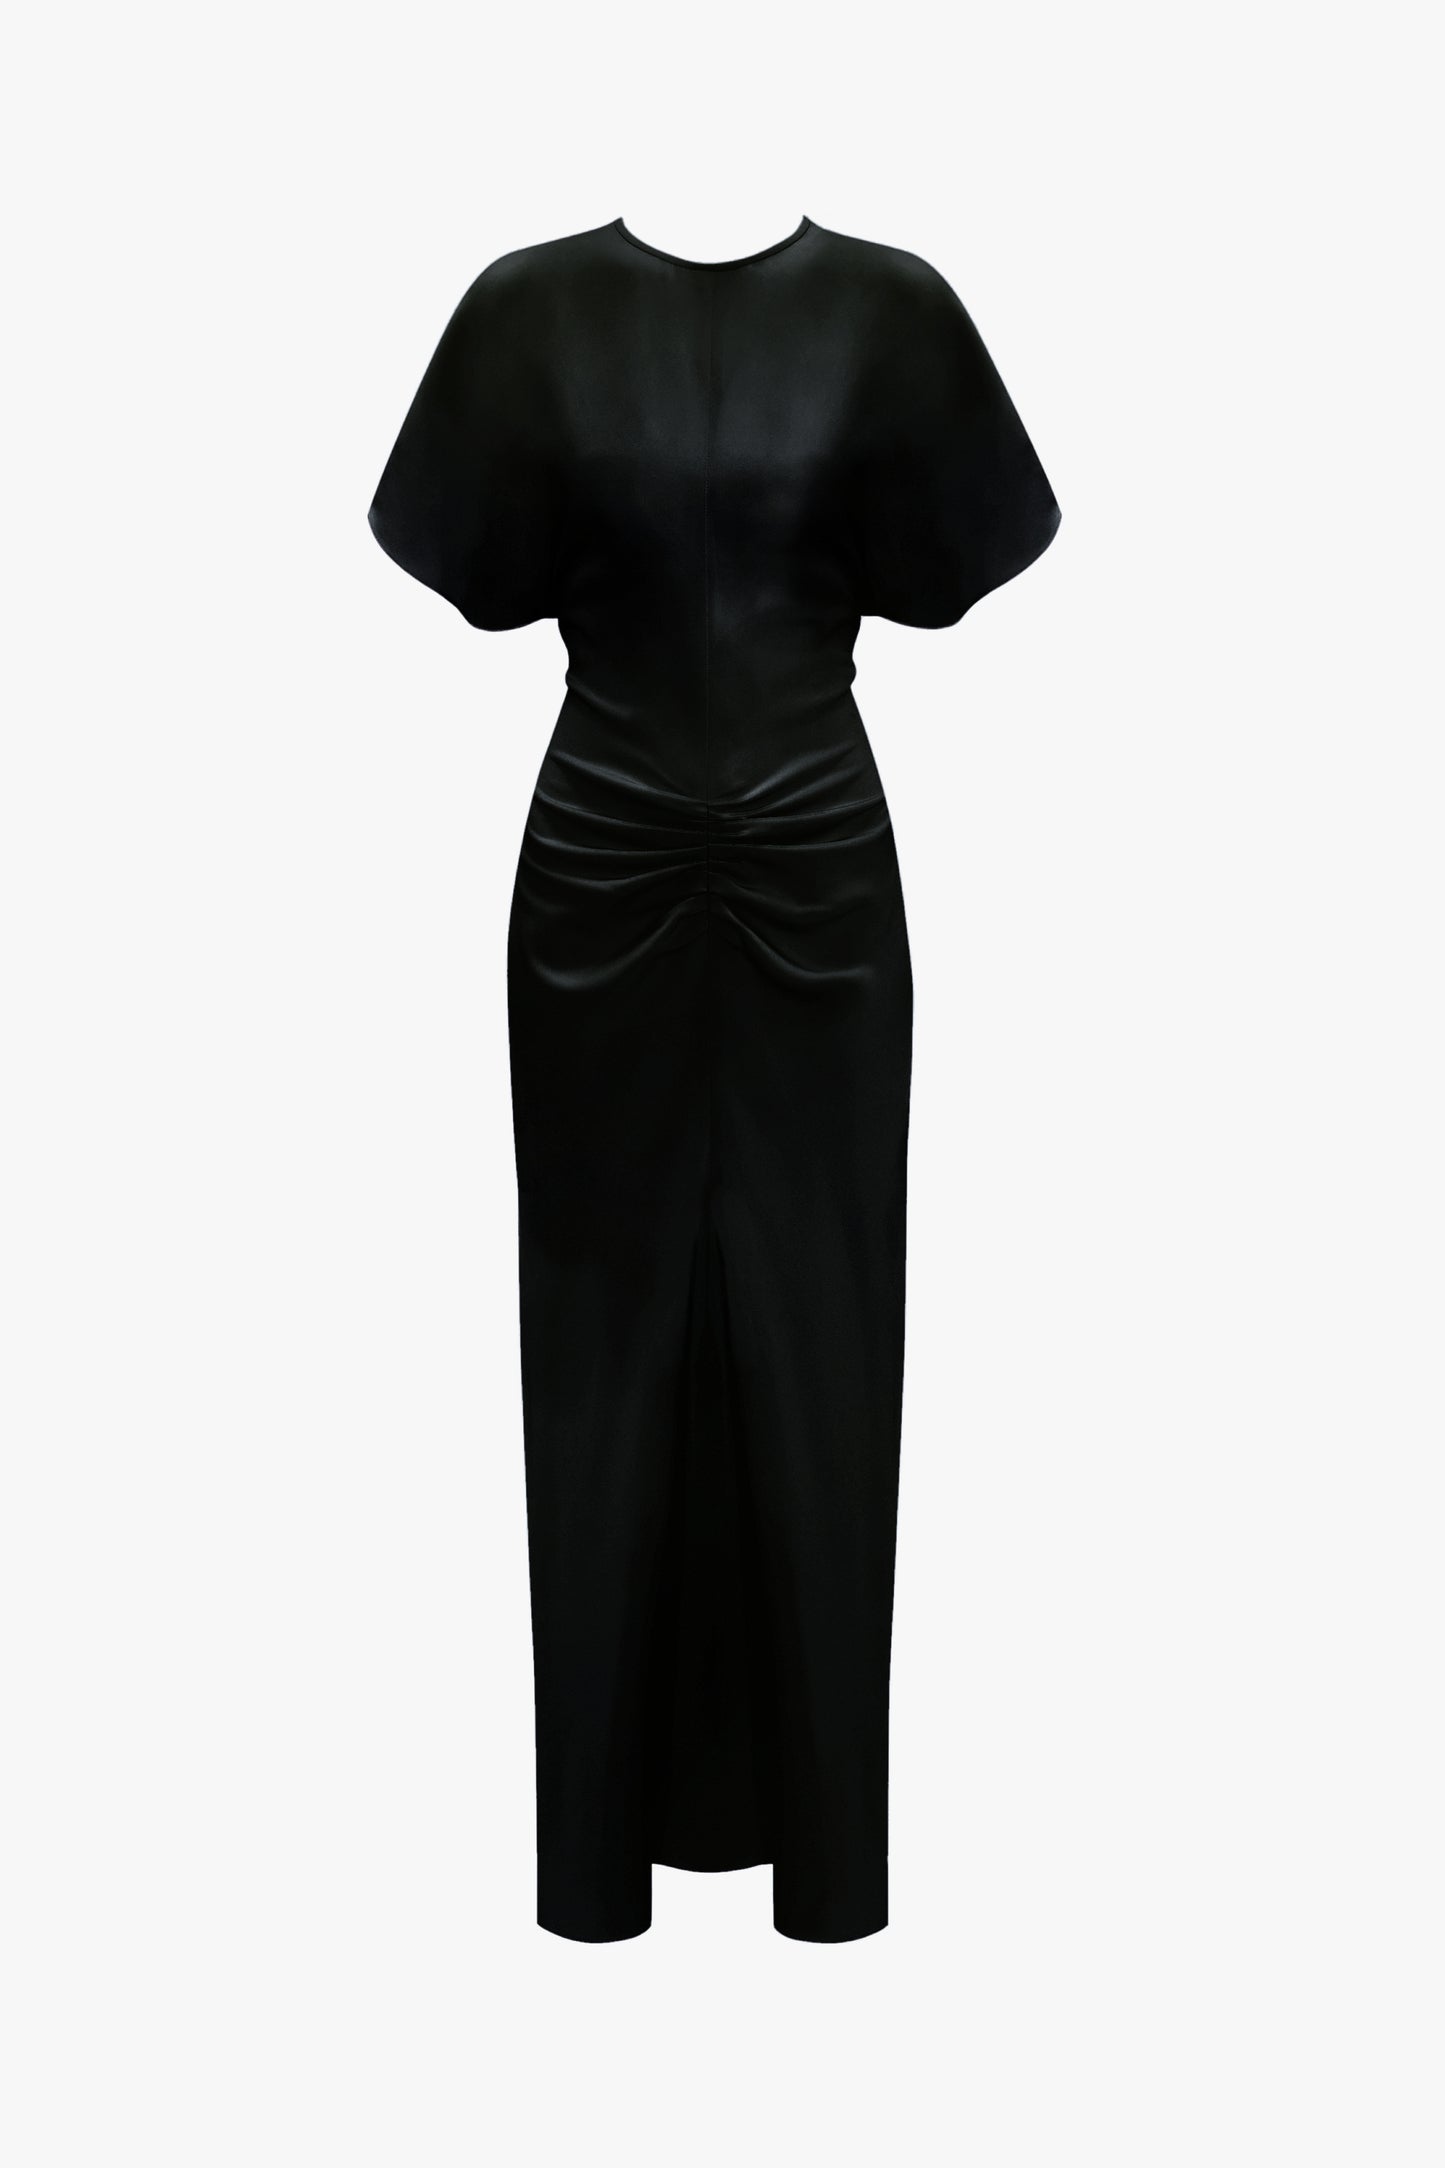 A Victoria Beckham black leather midi dress with a gathered waist and short sleeves, displayed on a mannequin against a white background.